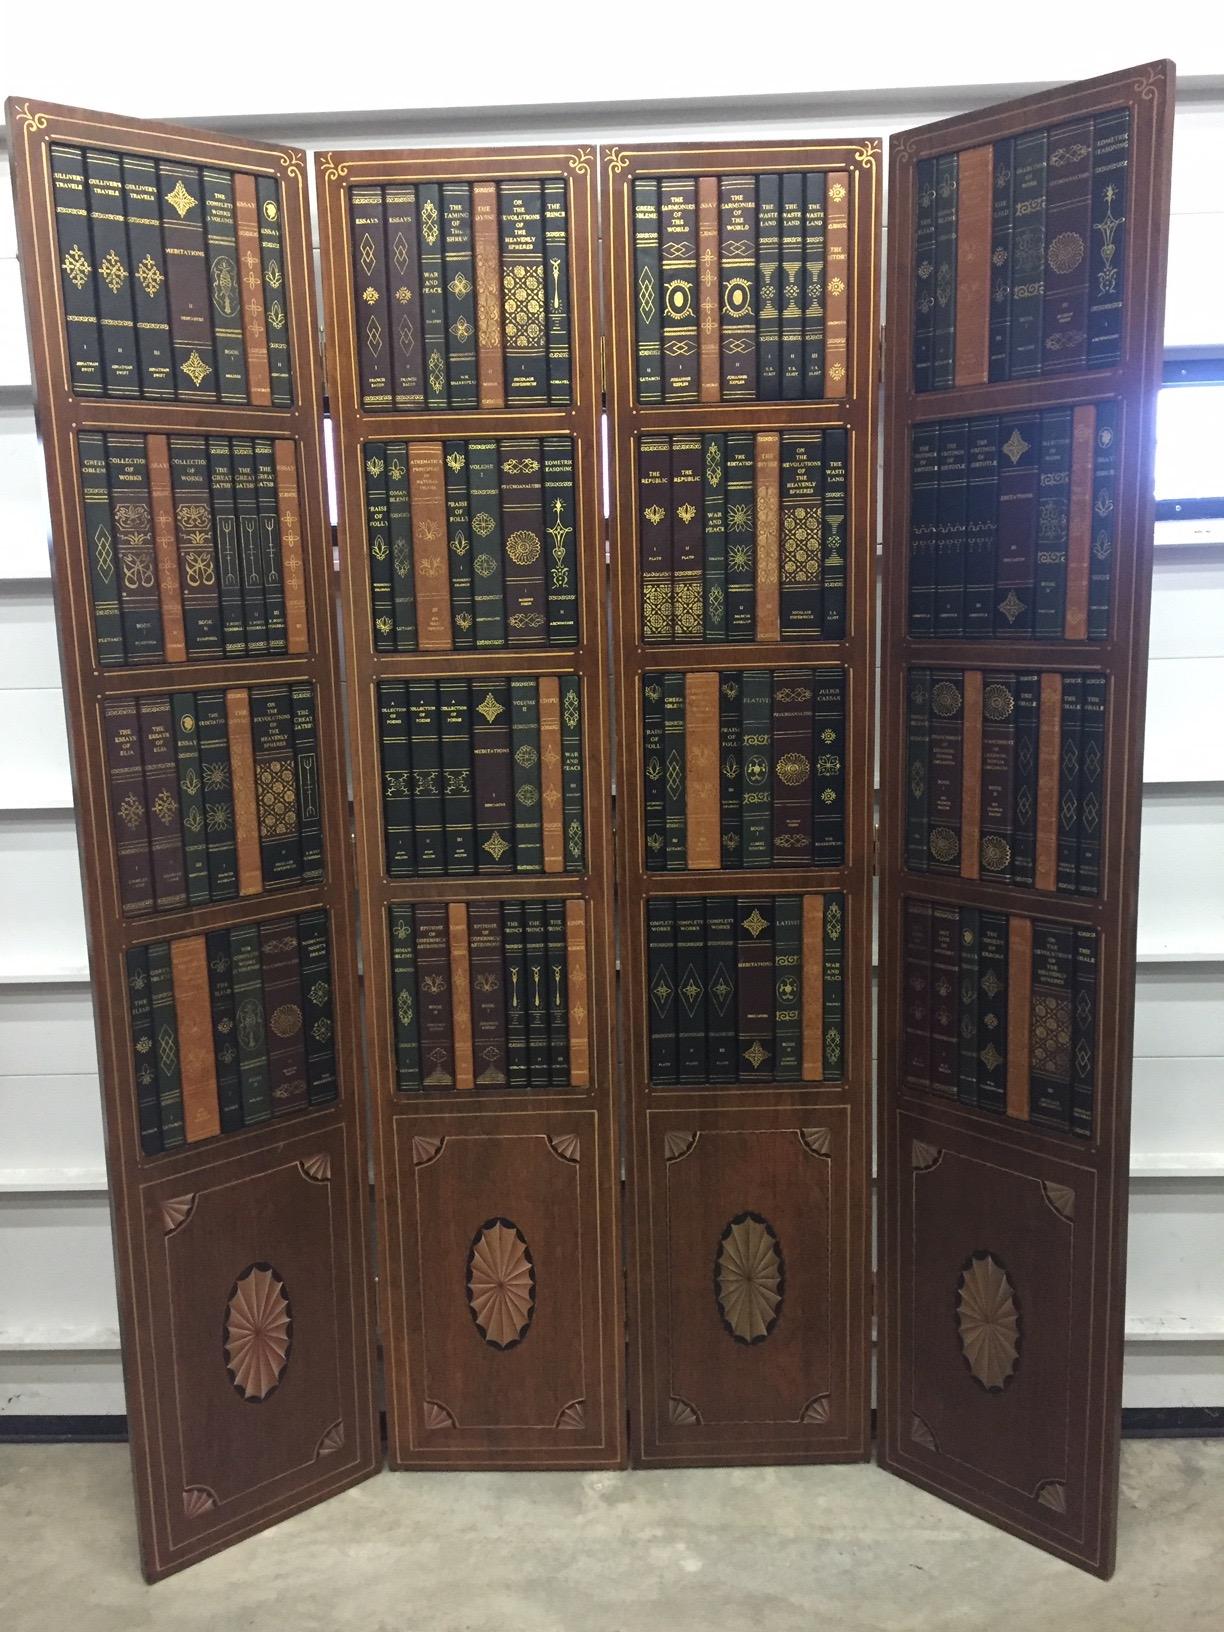 Gorgeous Tooled Leather and Wood Tromp l'oeil Book Motife Screen Room Divider 4